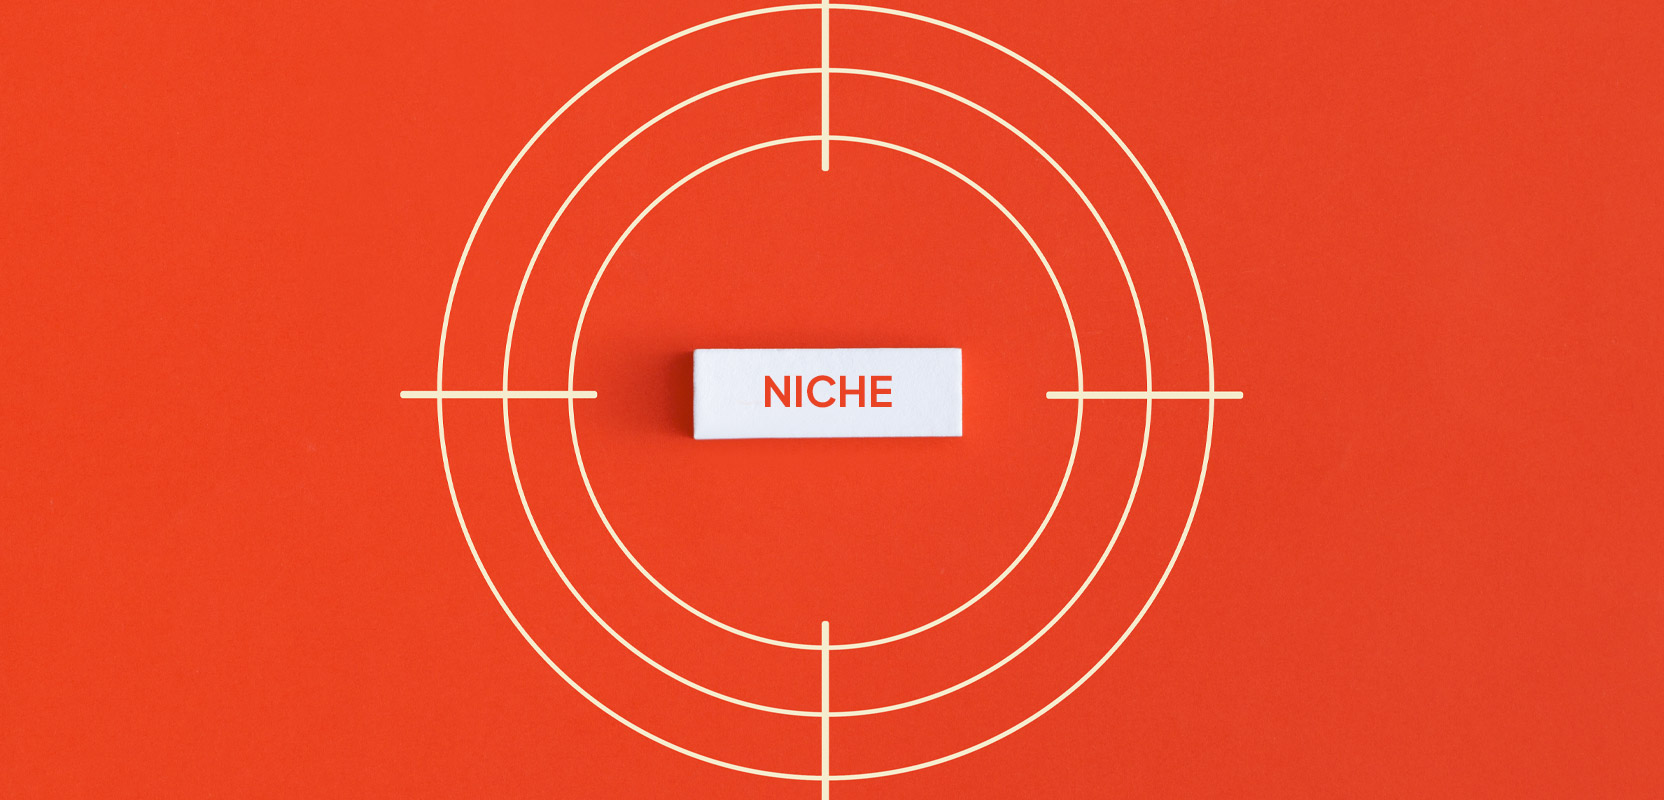 White target on an orange background with the word Niche in the center